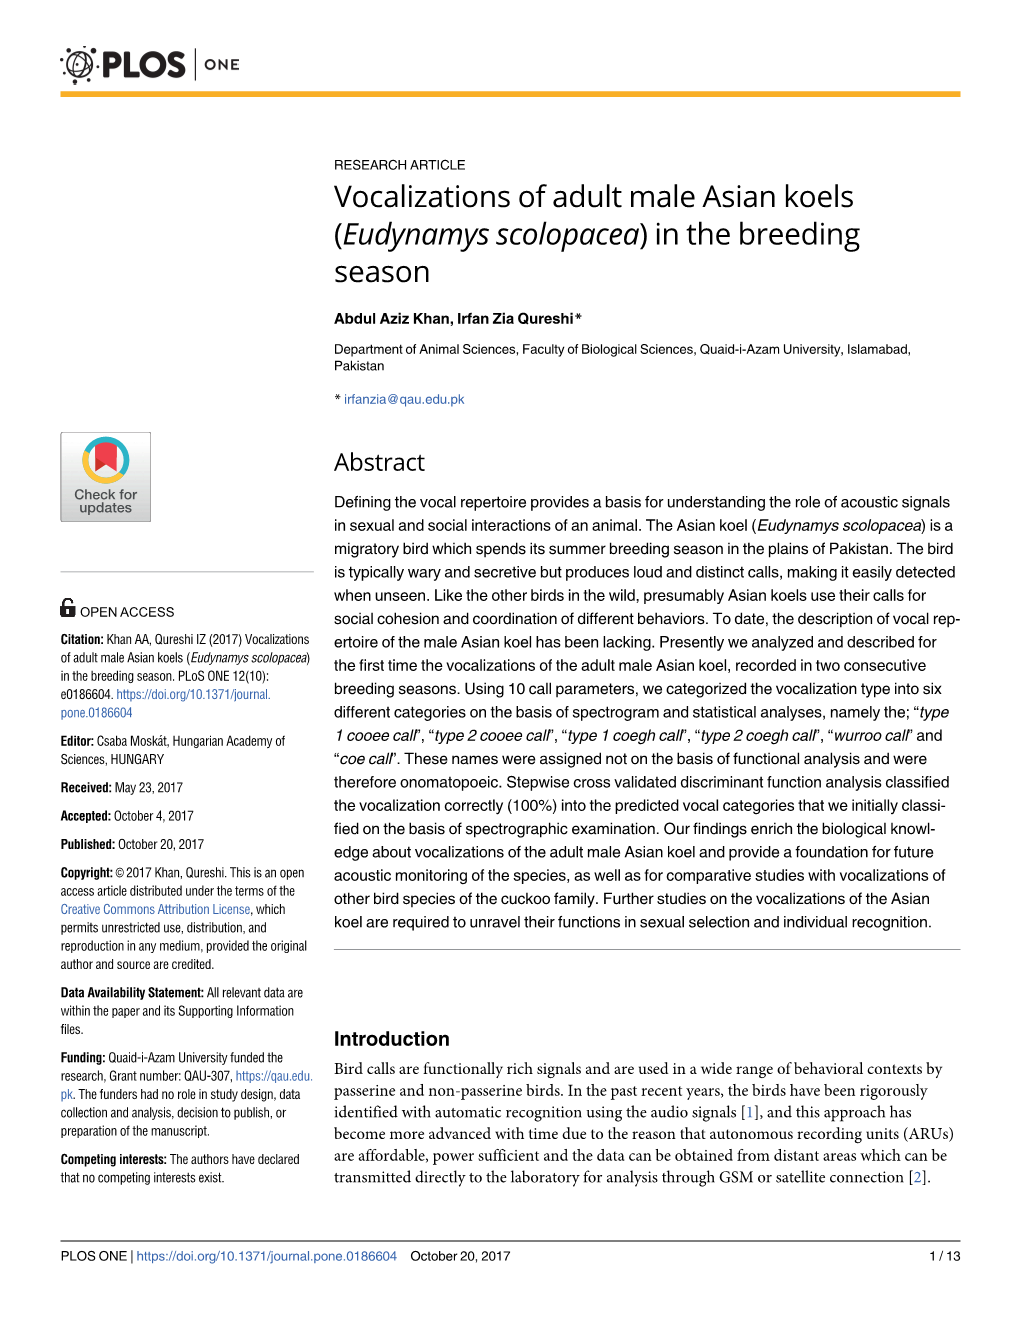 Vocalizations of Adult Male Asian Koels (Eudynamys Scolopacea) in the Breeding Season